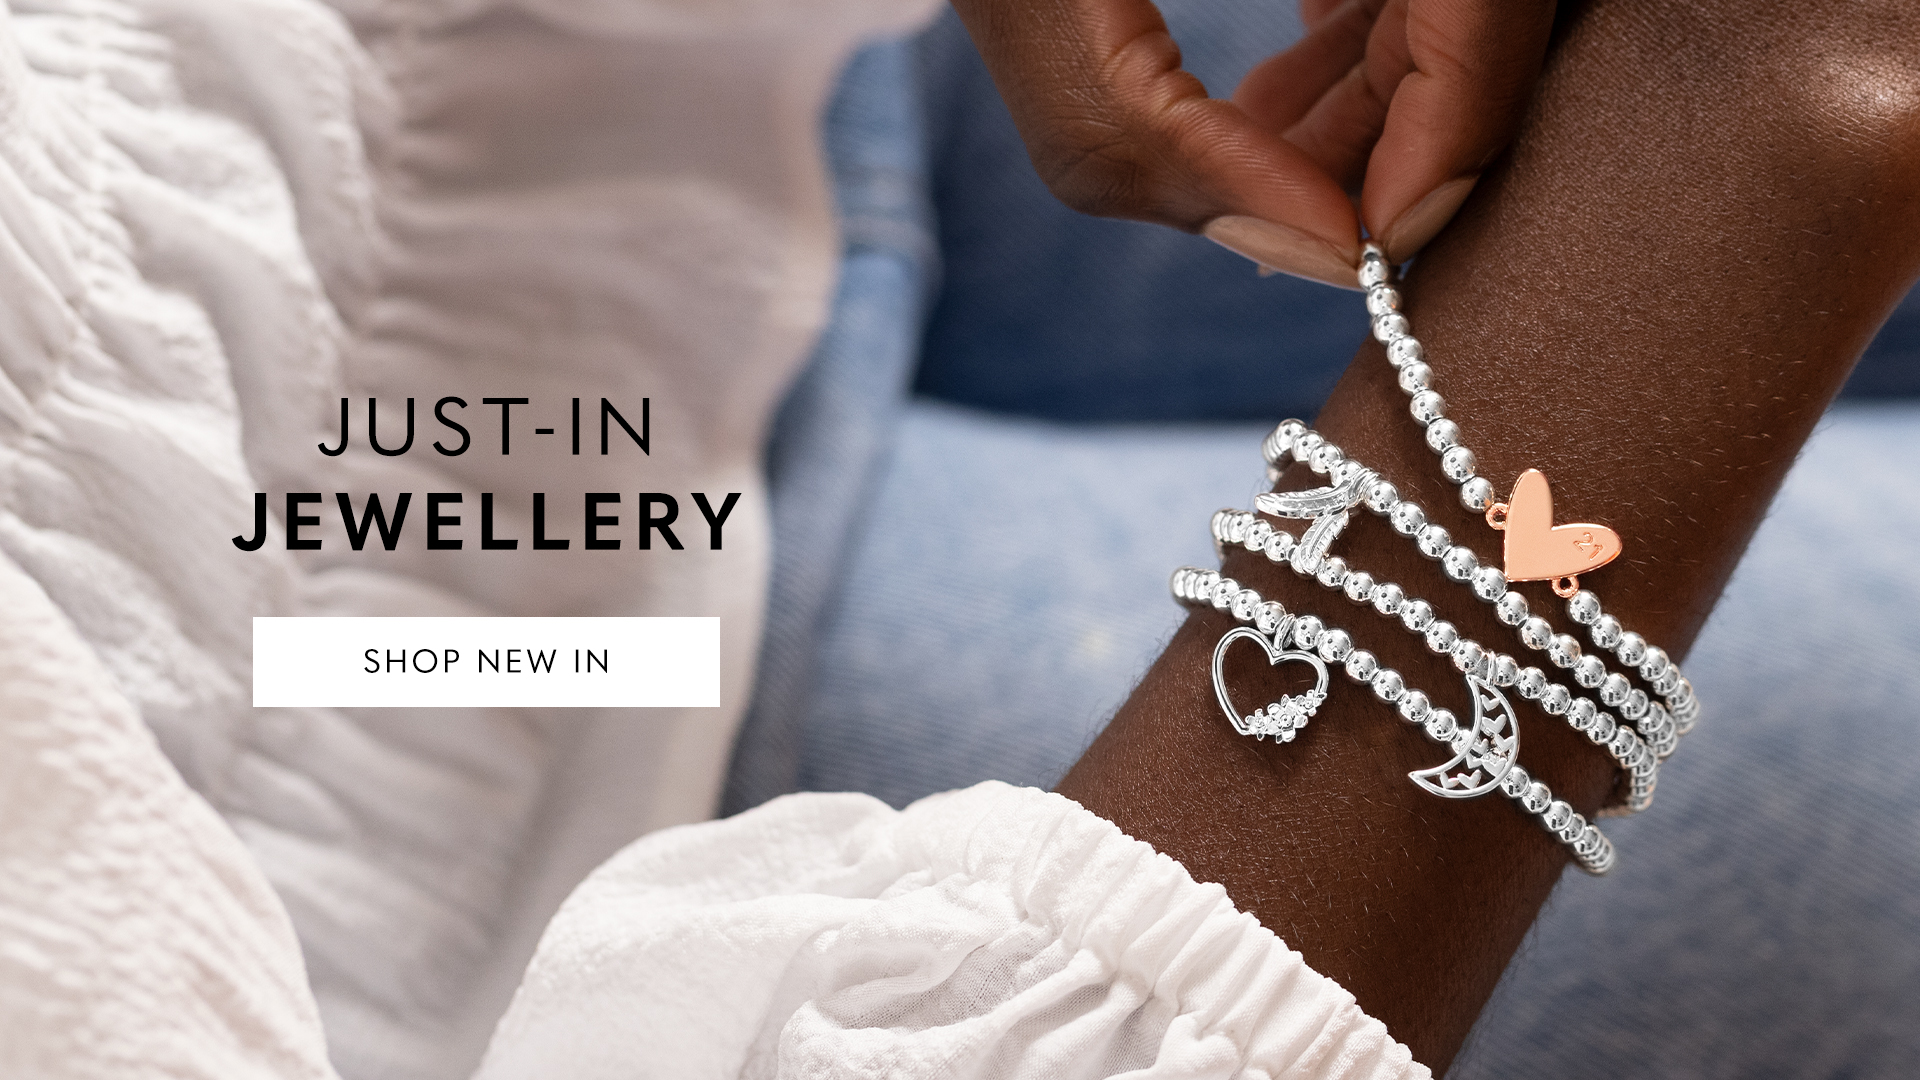 Joma Jewellery just-in jewellery showcasing our signature silver beaded A Little bracelets with a collection of charms.